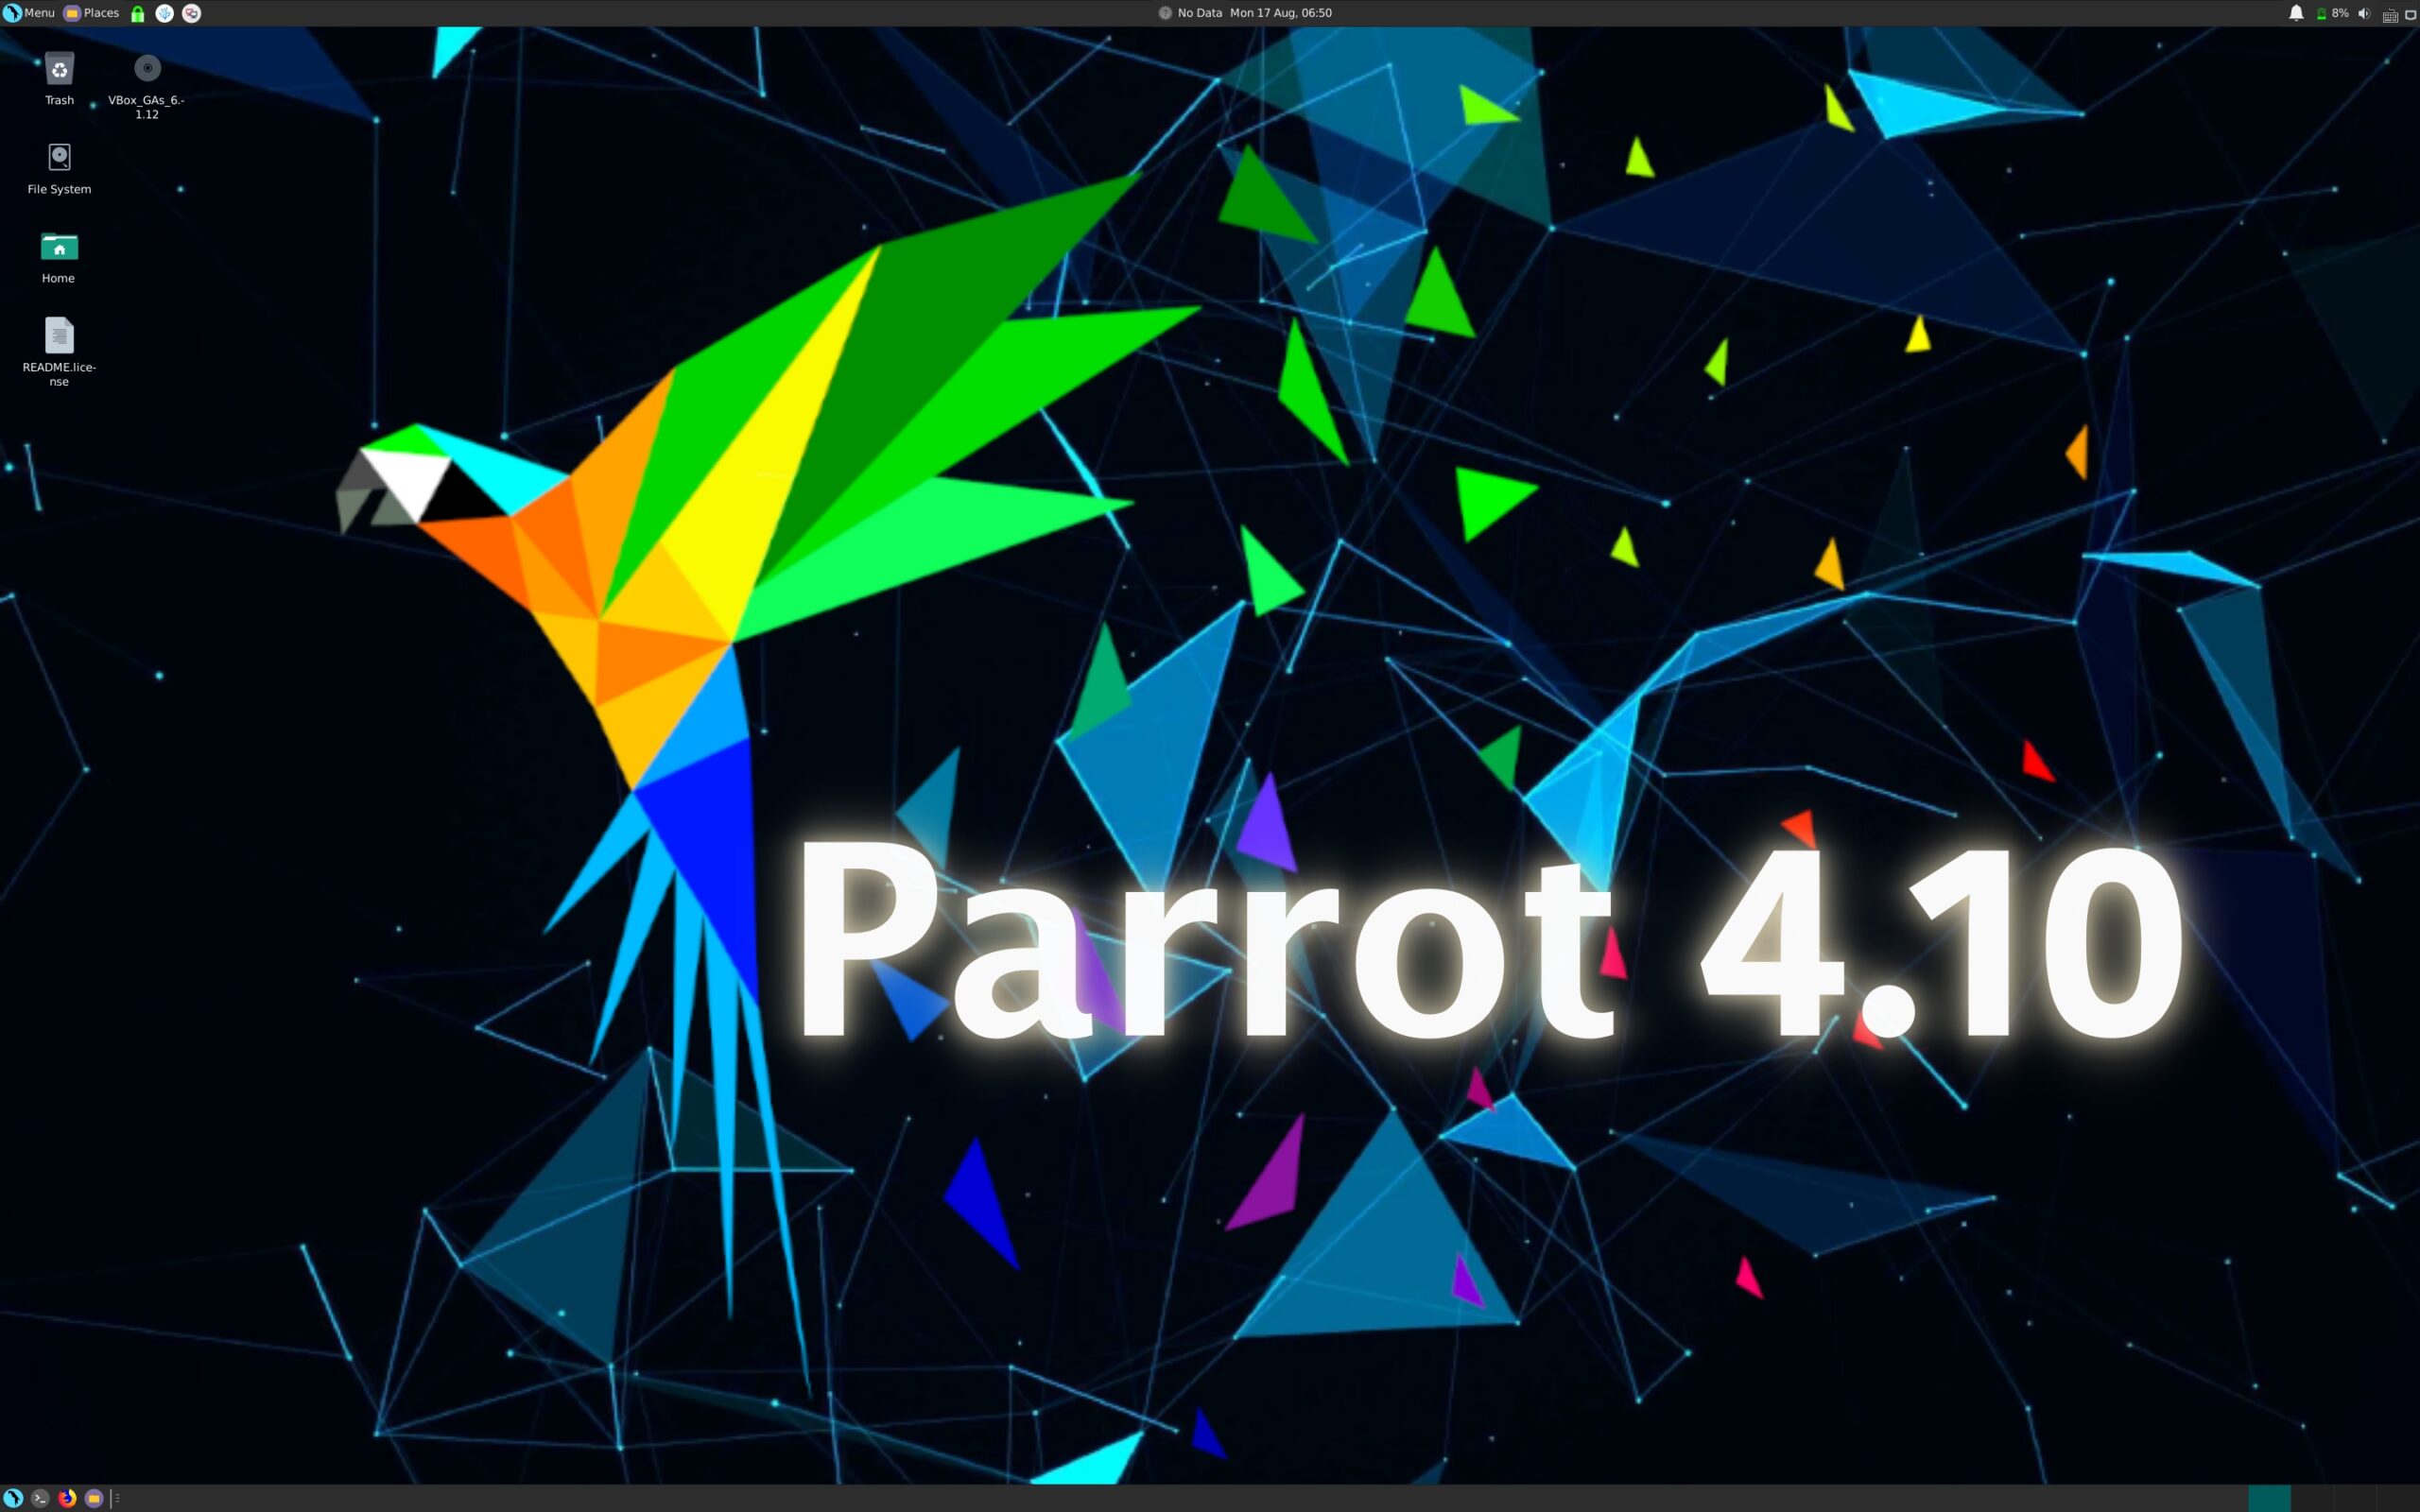 Parrot 4.10 Ethical Hacking OS Released with an Xfce Edition, AnonSurf 3.0 and Metasploit 6.0